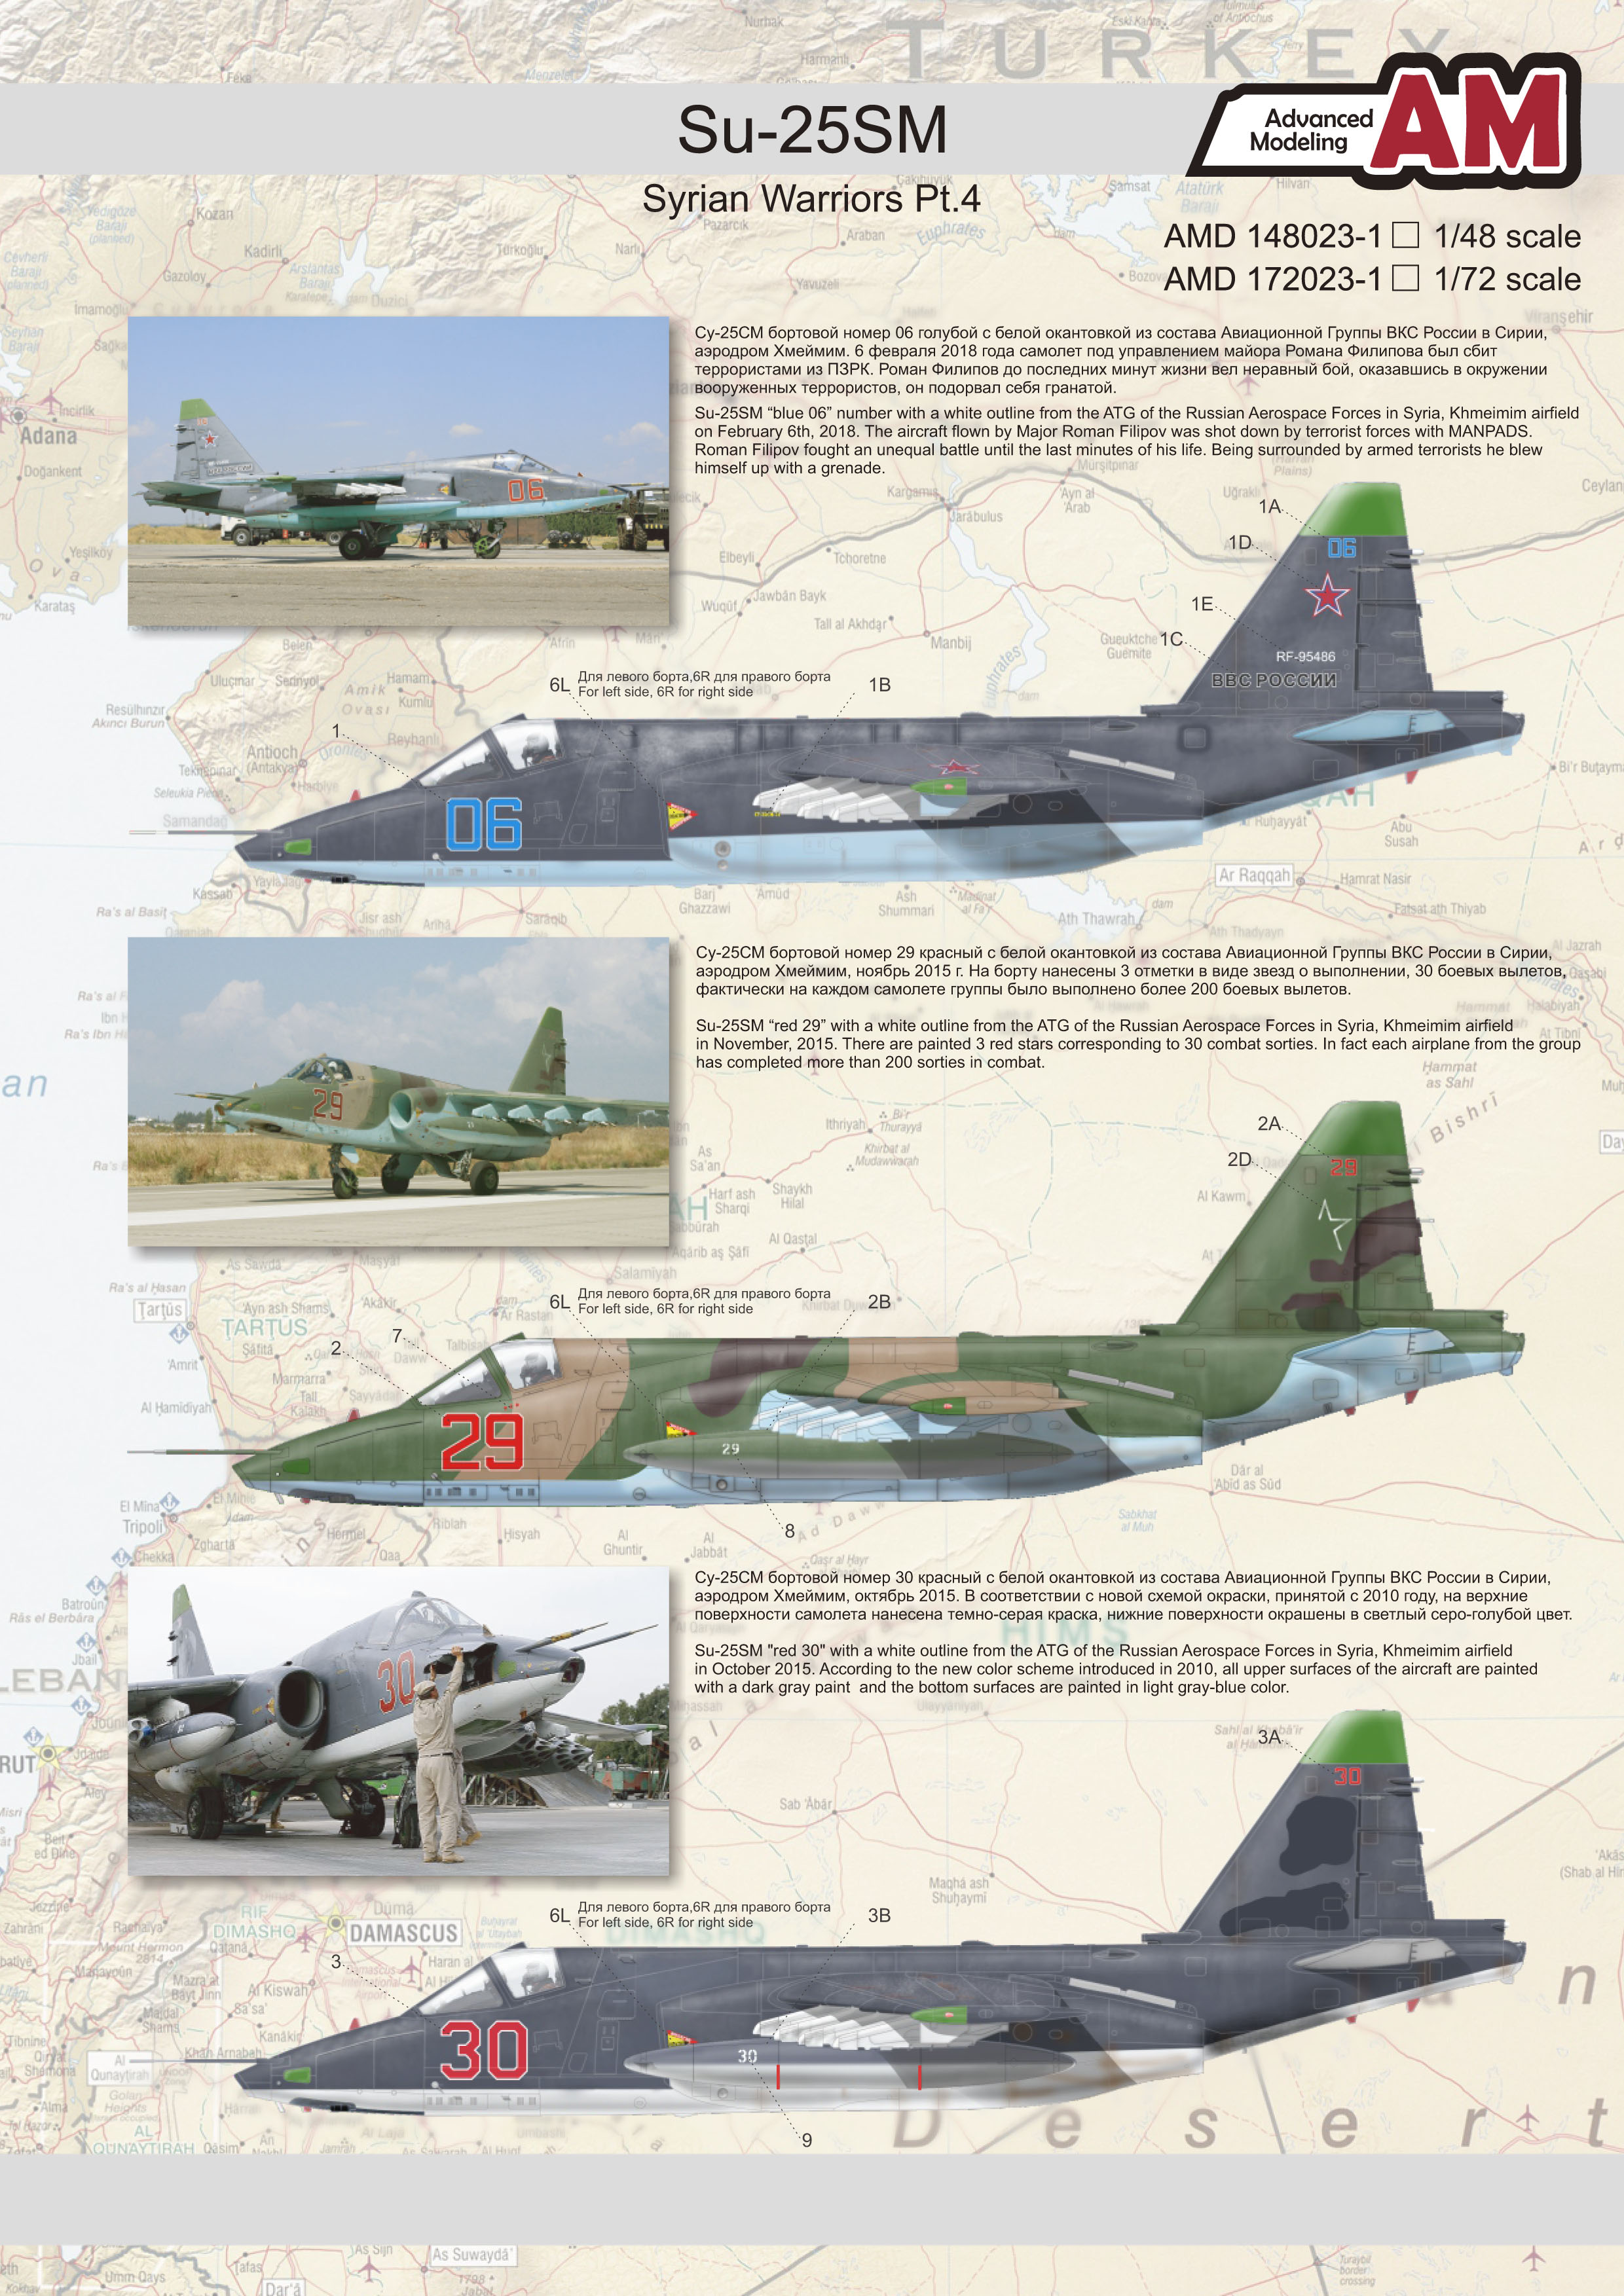 Decal of Su-25 "Syrian Warriors" Pt. 4 (for pre-order with PRE-QNT4001 only)